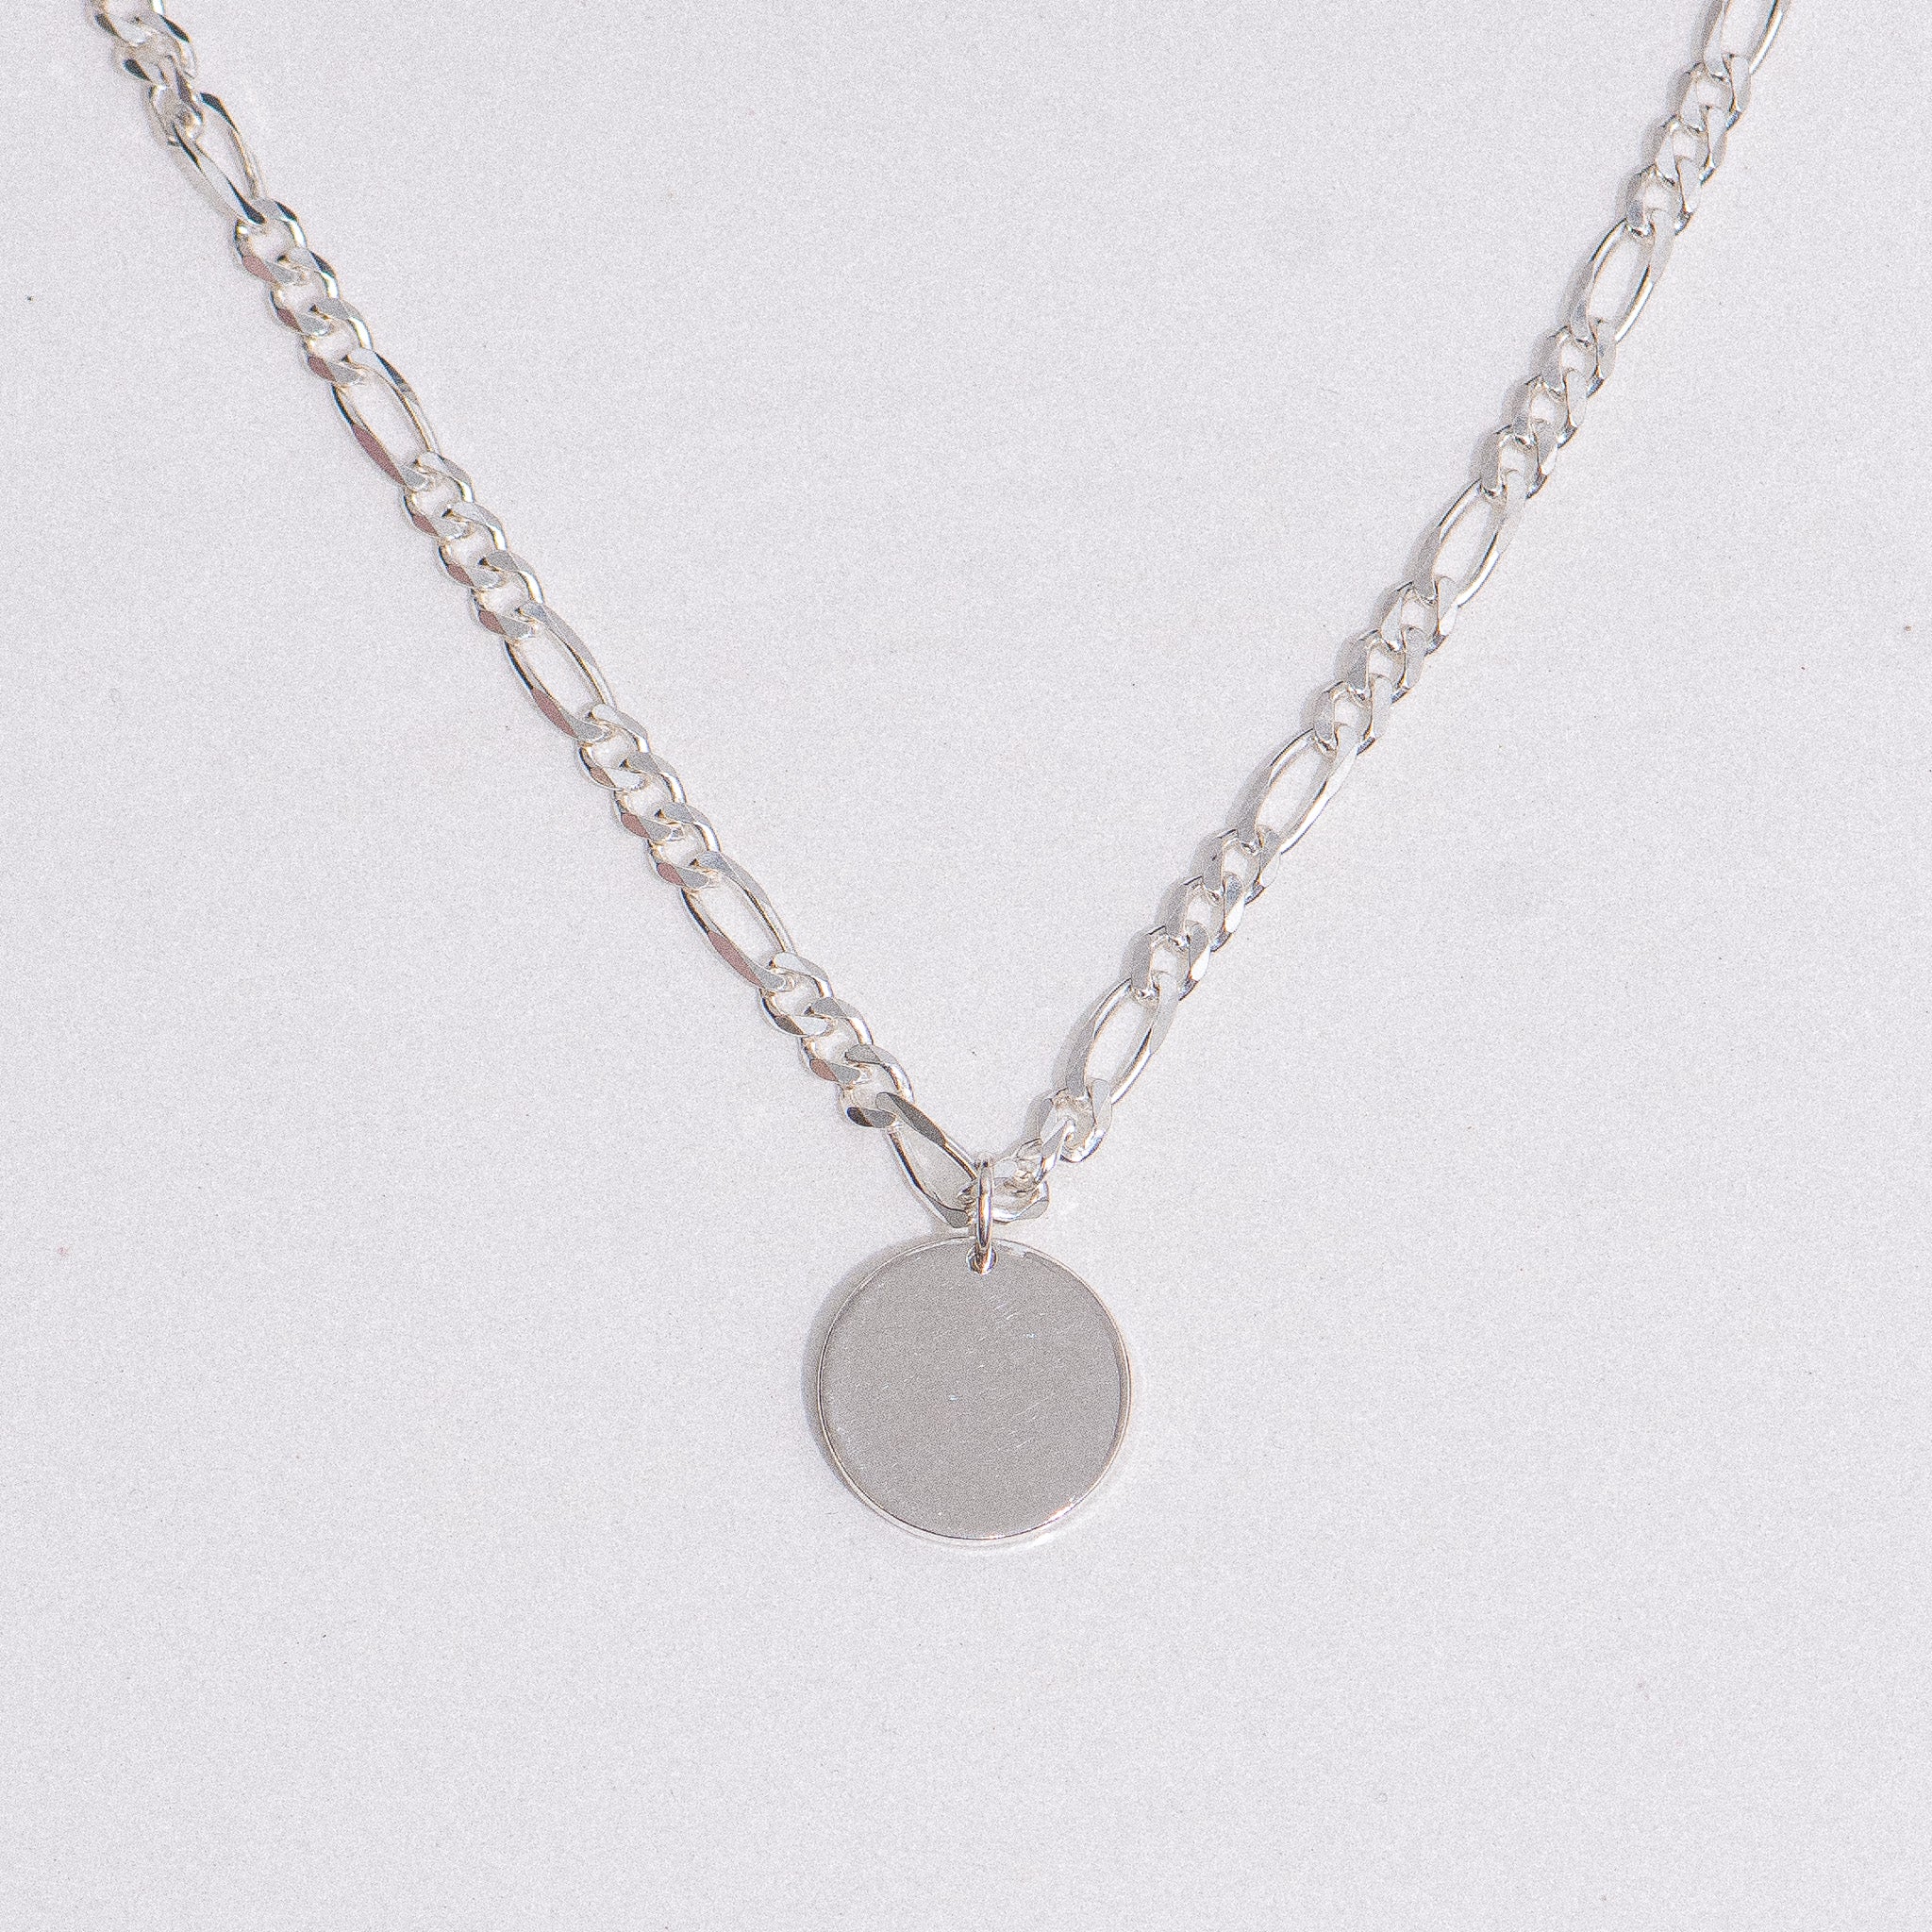 Small Engraveable Circle Charm Necklace